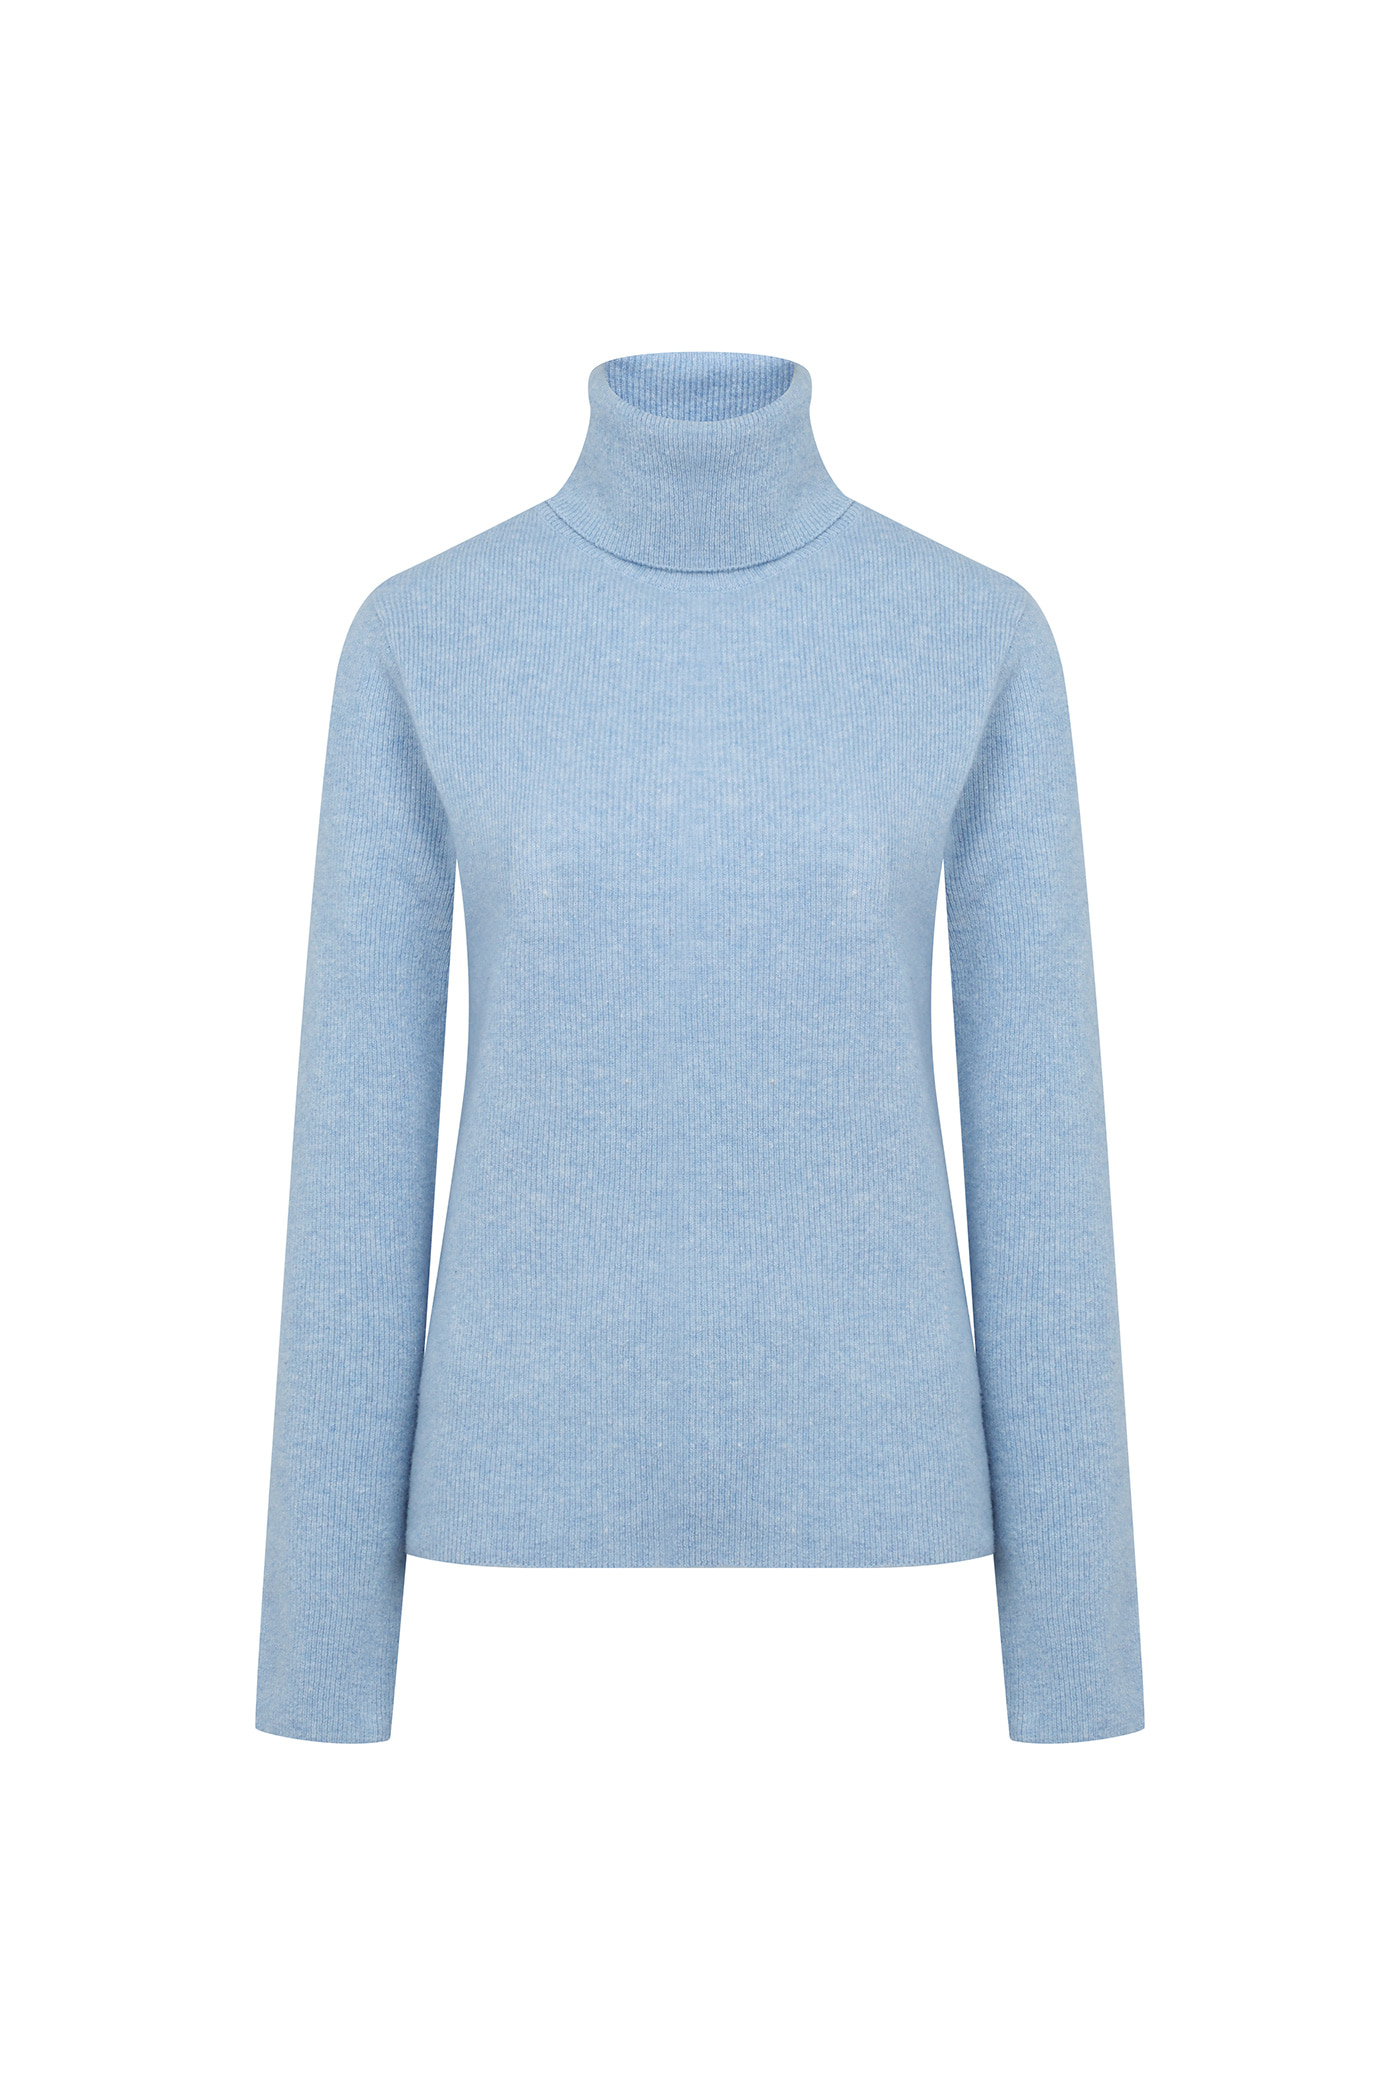 Merino Wool 100 Ribbed High Neck Knit[LMBBWIKN156]-2color